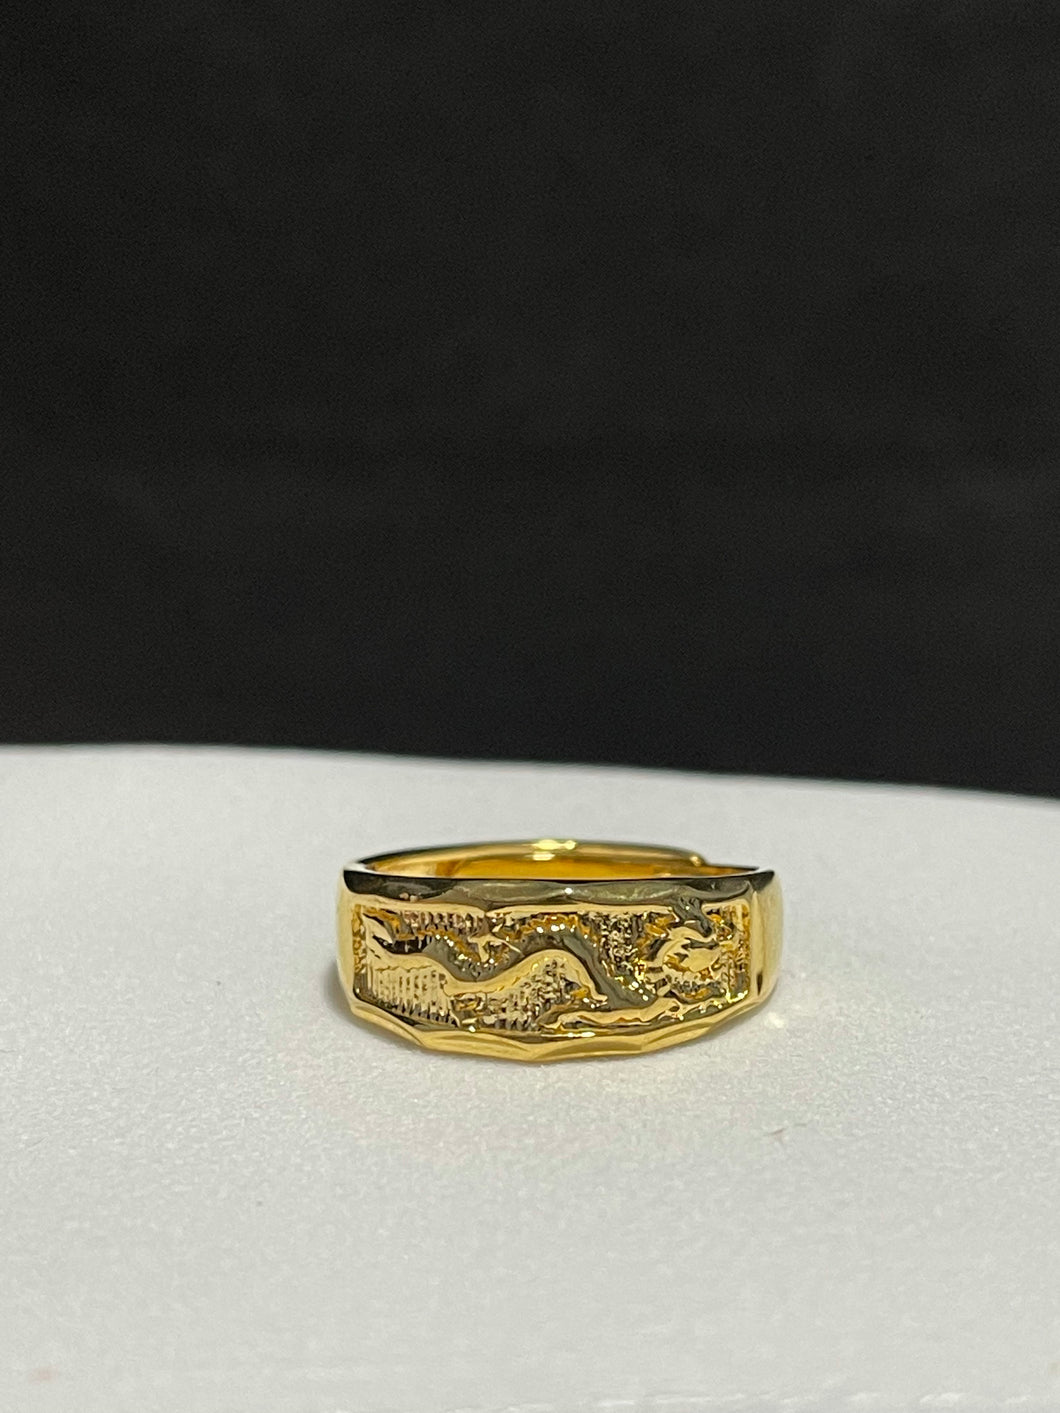 Men’s Unique Gold Plated Dragon Ring For Sale Online